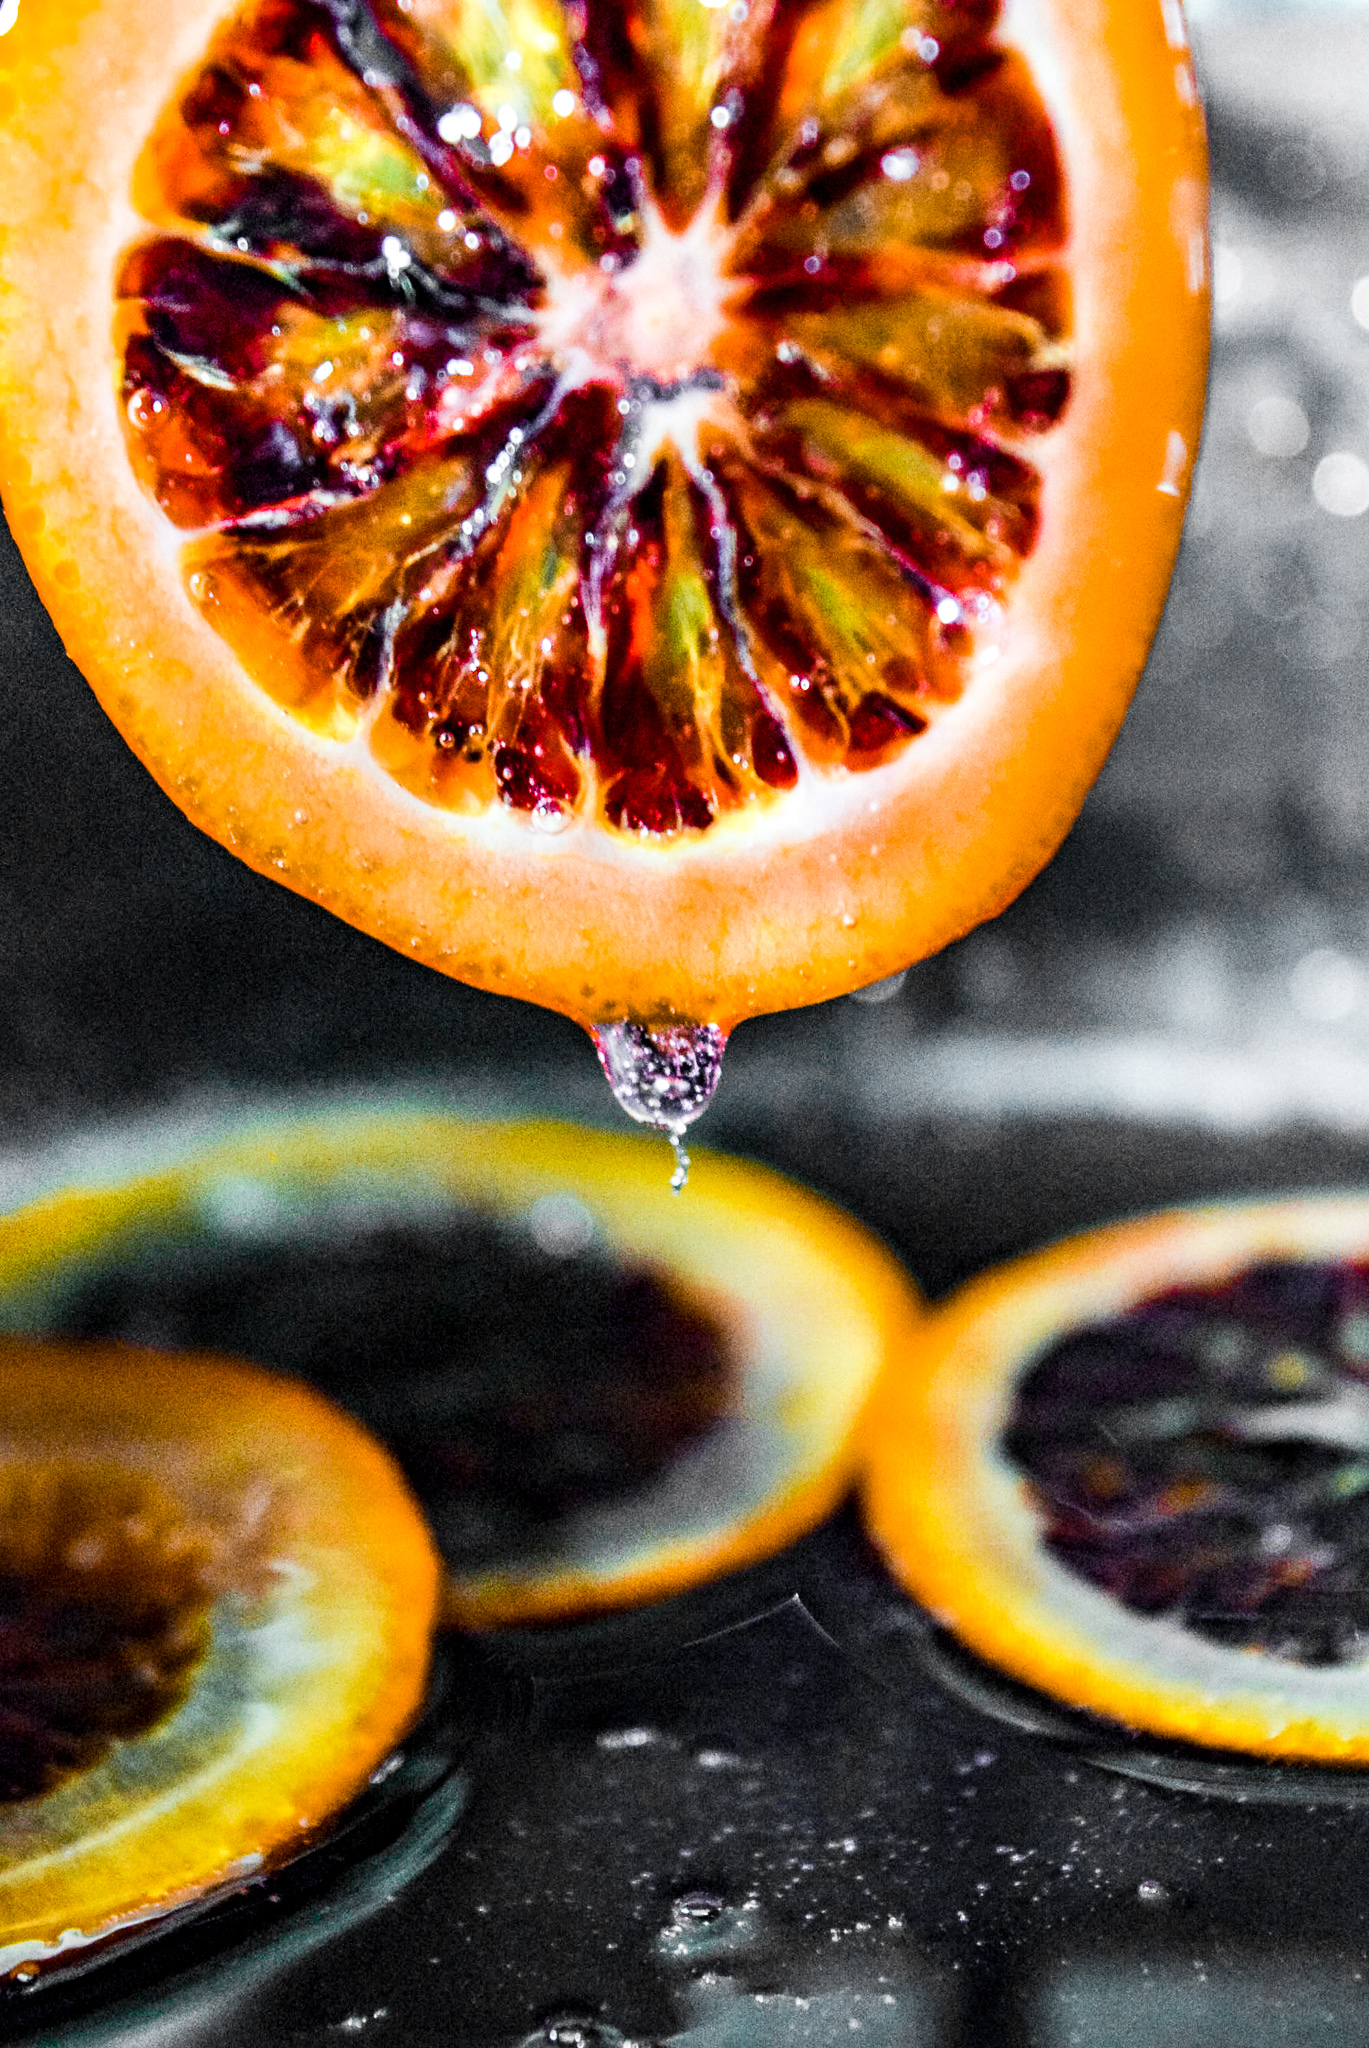 Removing blood orange slice from sugar water after candying